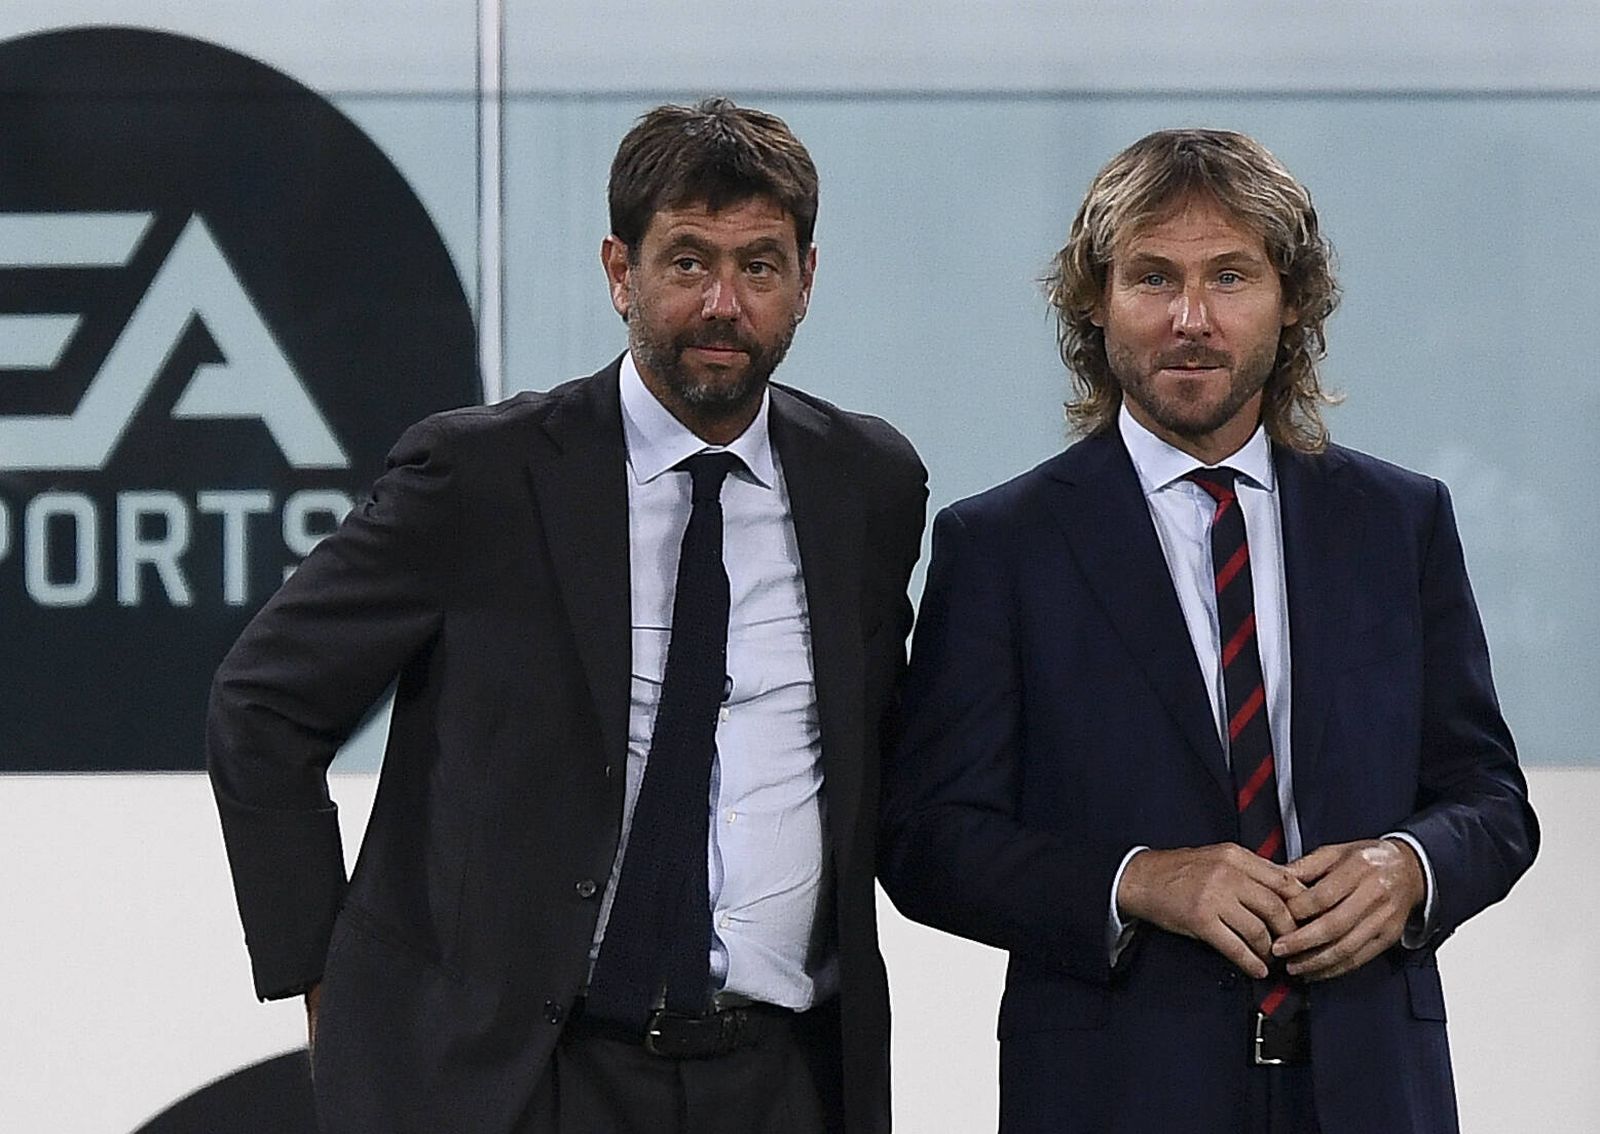 Juventus FC v Spezia Calcio - Serie A Andrea Agnelli and Pavel Nedved look on prior to the Serie A football match between Juventus FC and Spezia Calcio. Turin Italy Copyright: xNicolxCampox